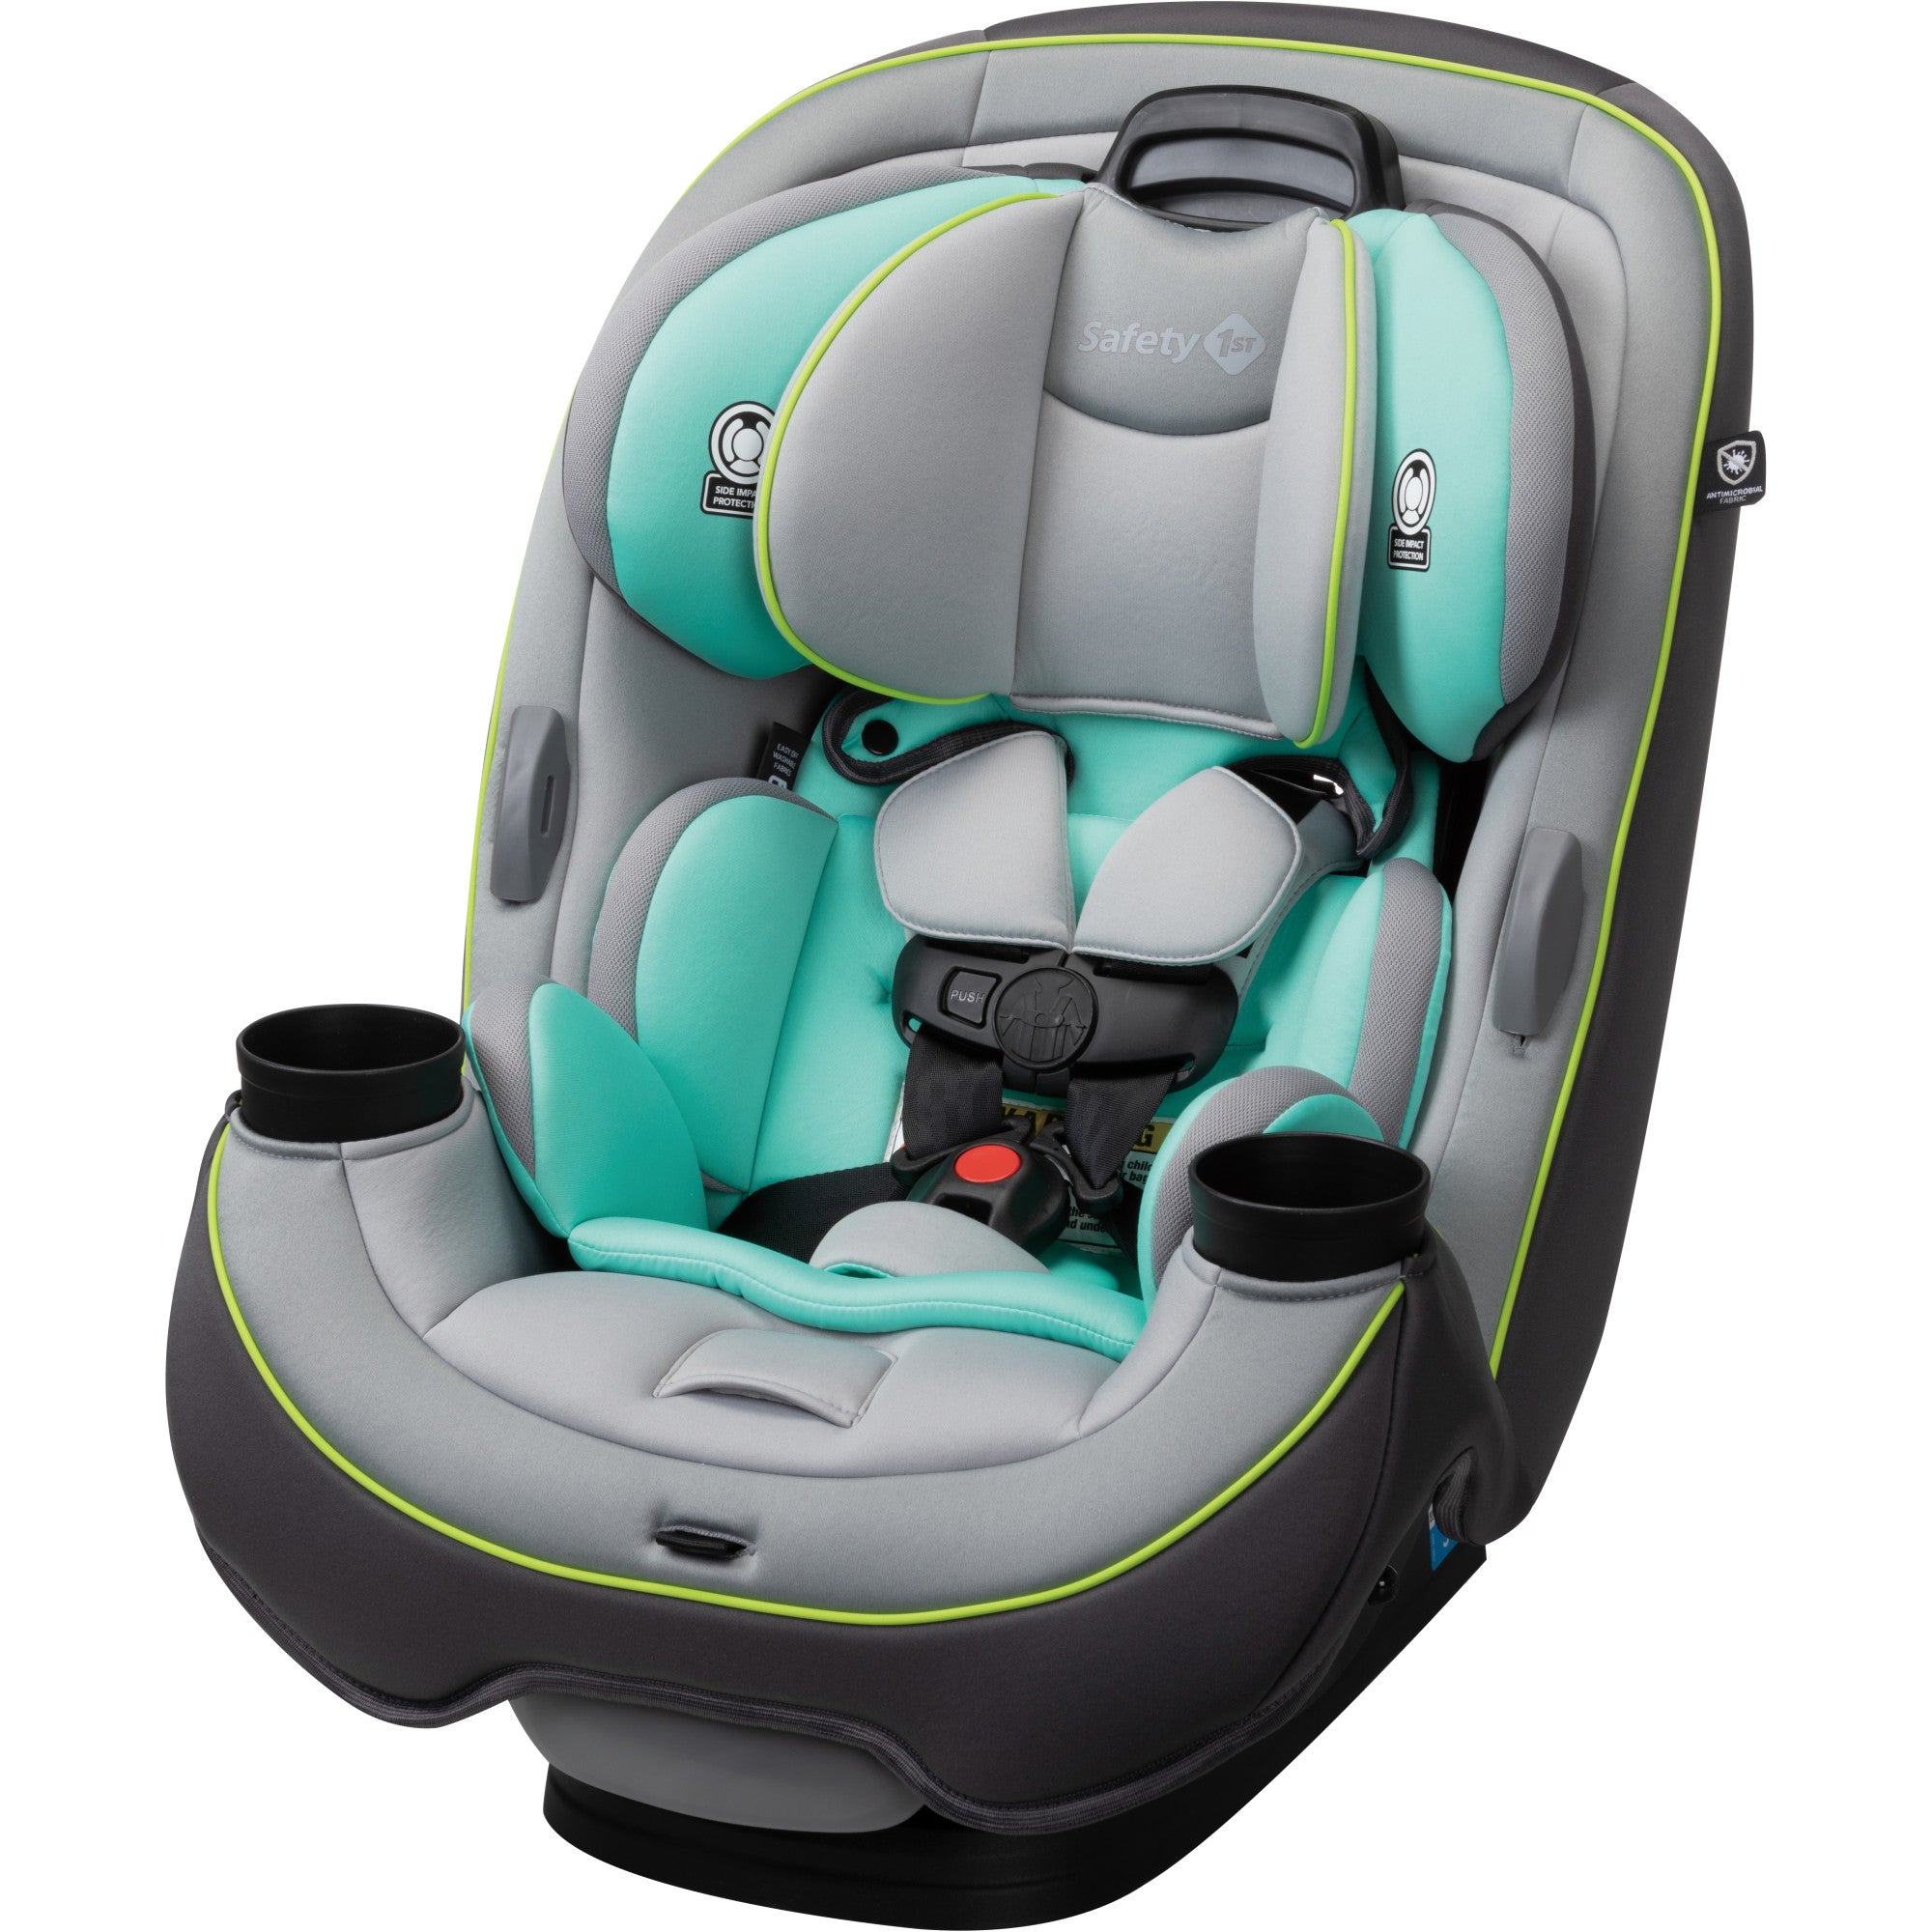 Safety first car seat in grey and turquoise